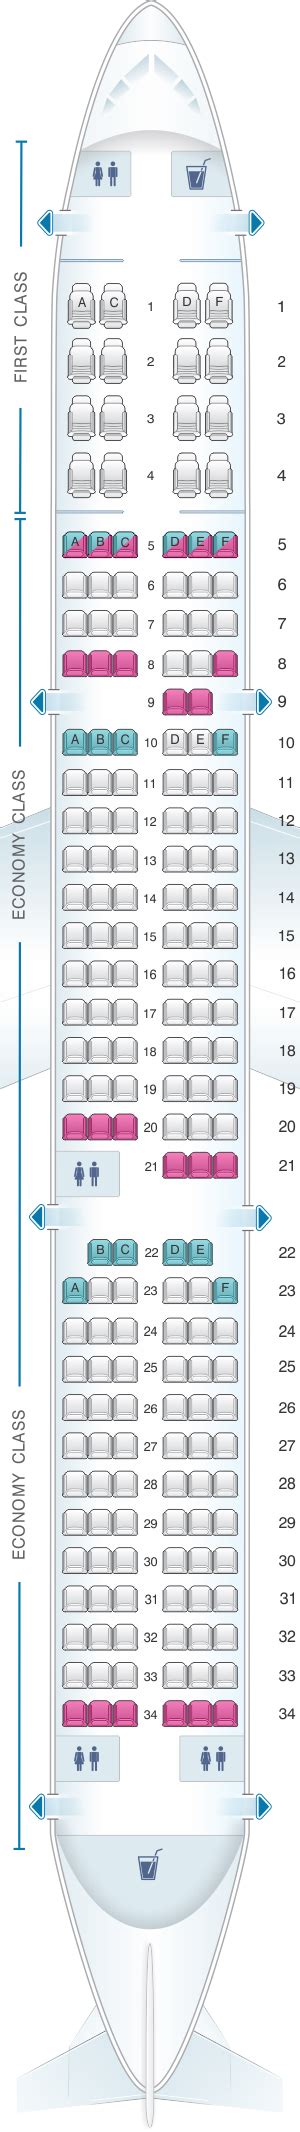 American airbus a321 seat map - View map. Airbus A321 (321) Layout 2. Recliner First (Rows 1-5) Recliner Delta Comfort+ (Rows 10-14) Standard Economy (Rows 15-39) Viewing. For your next Delta flight, use this seating chart to get the most comfortable seats, legroom, and recline on .